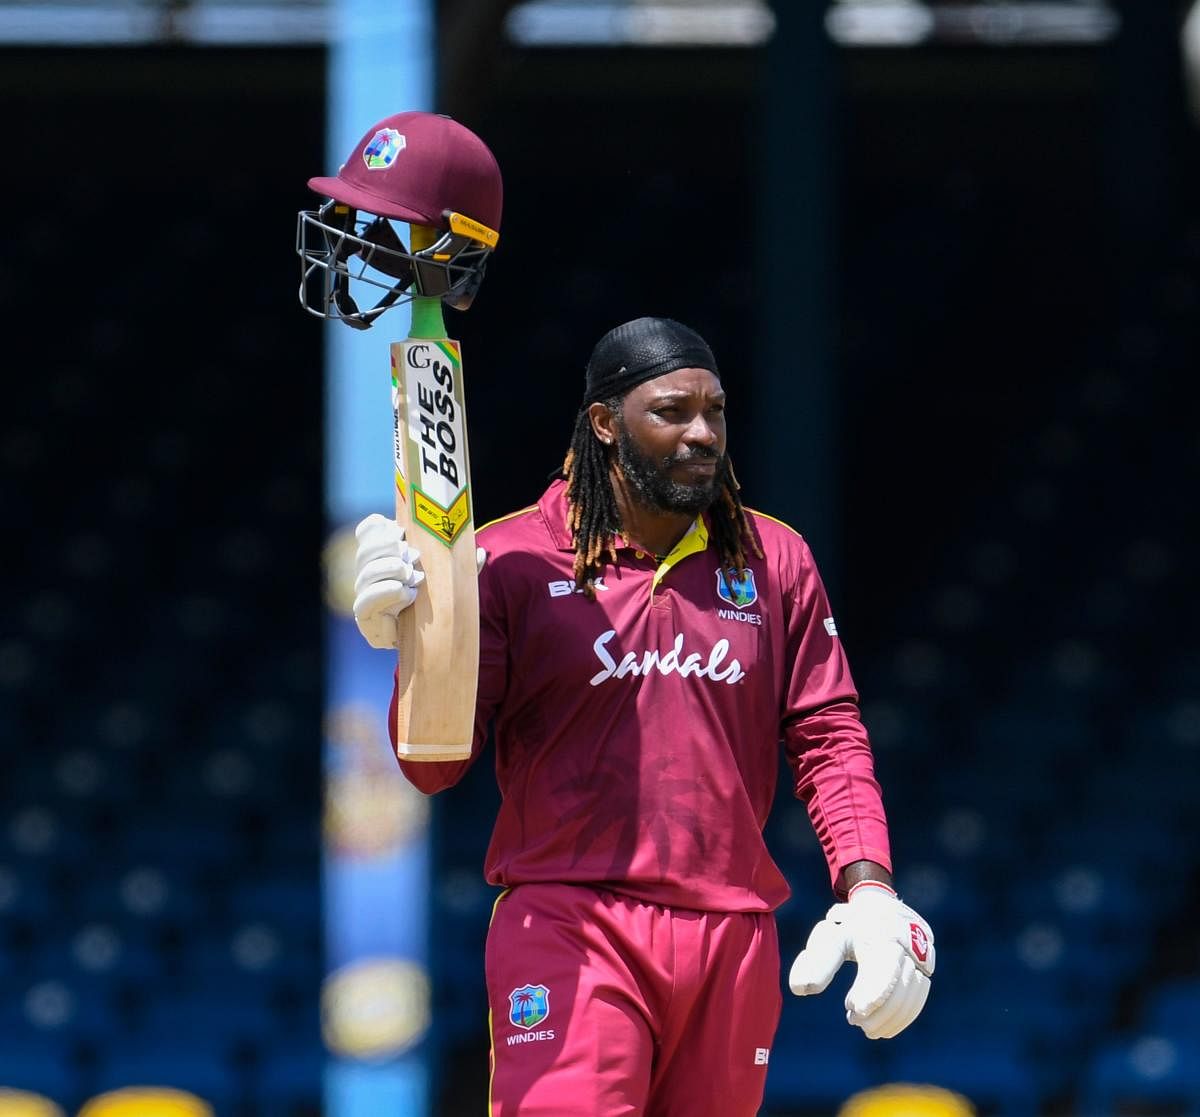 Chris Gayle celebrates his half-century during the 3rd ODI match between West Indies and India. Photo credit: AFP